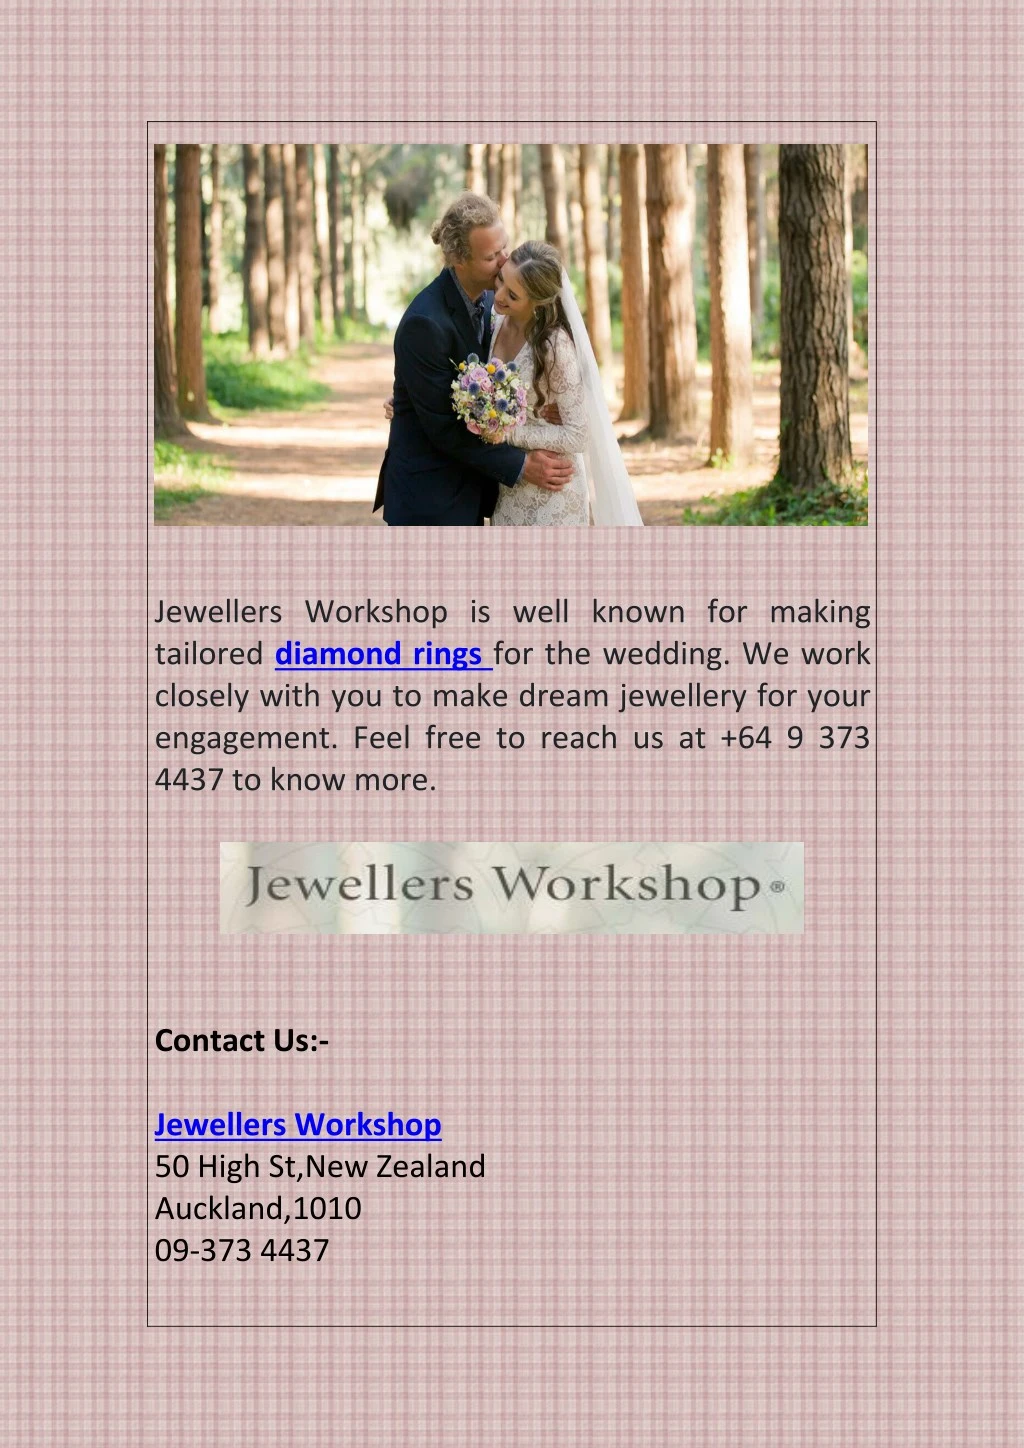 jewellers workshop is well known for making